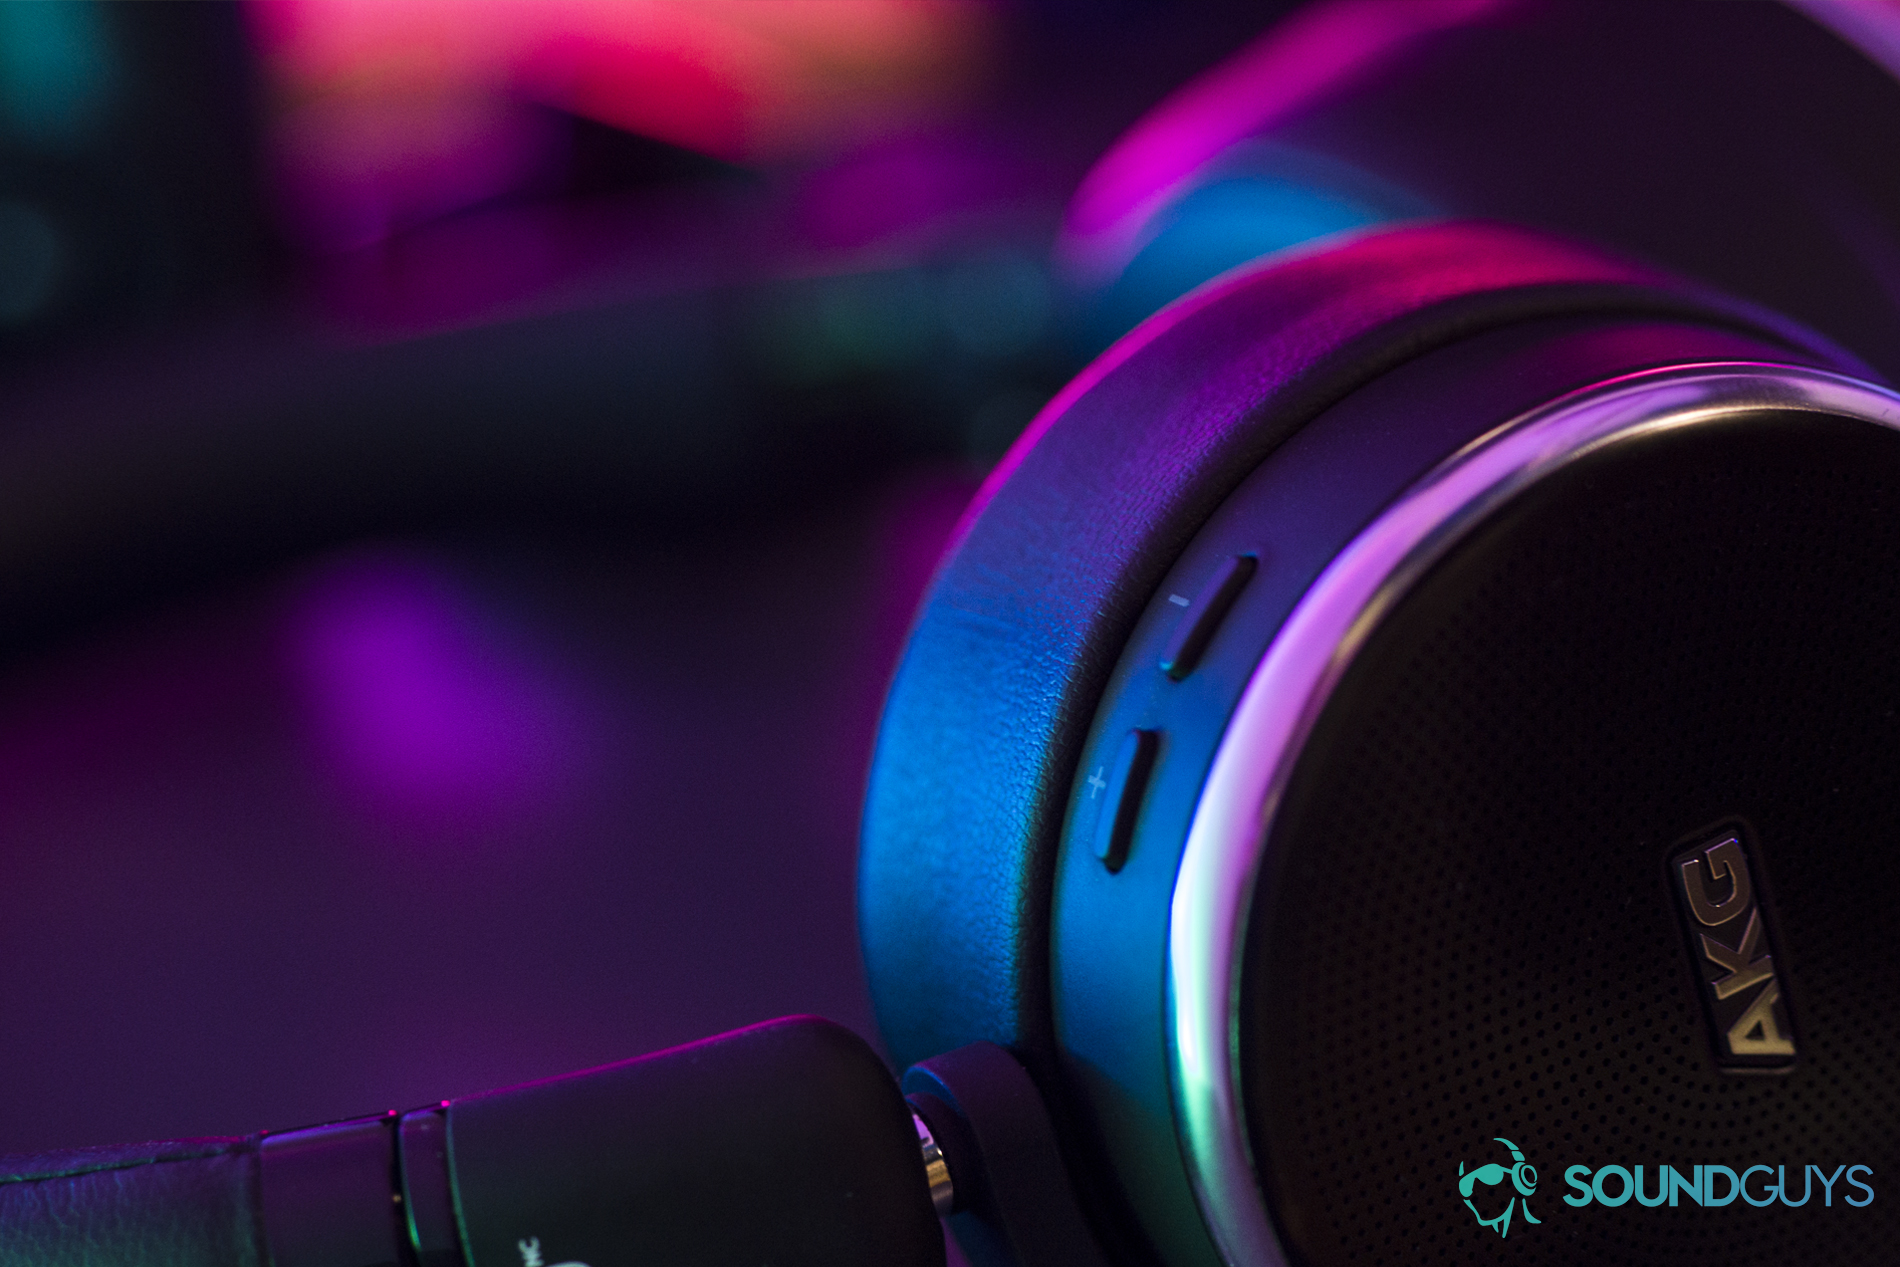 The AKG N60NC in colored light with close-up on the volume buttons.